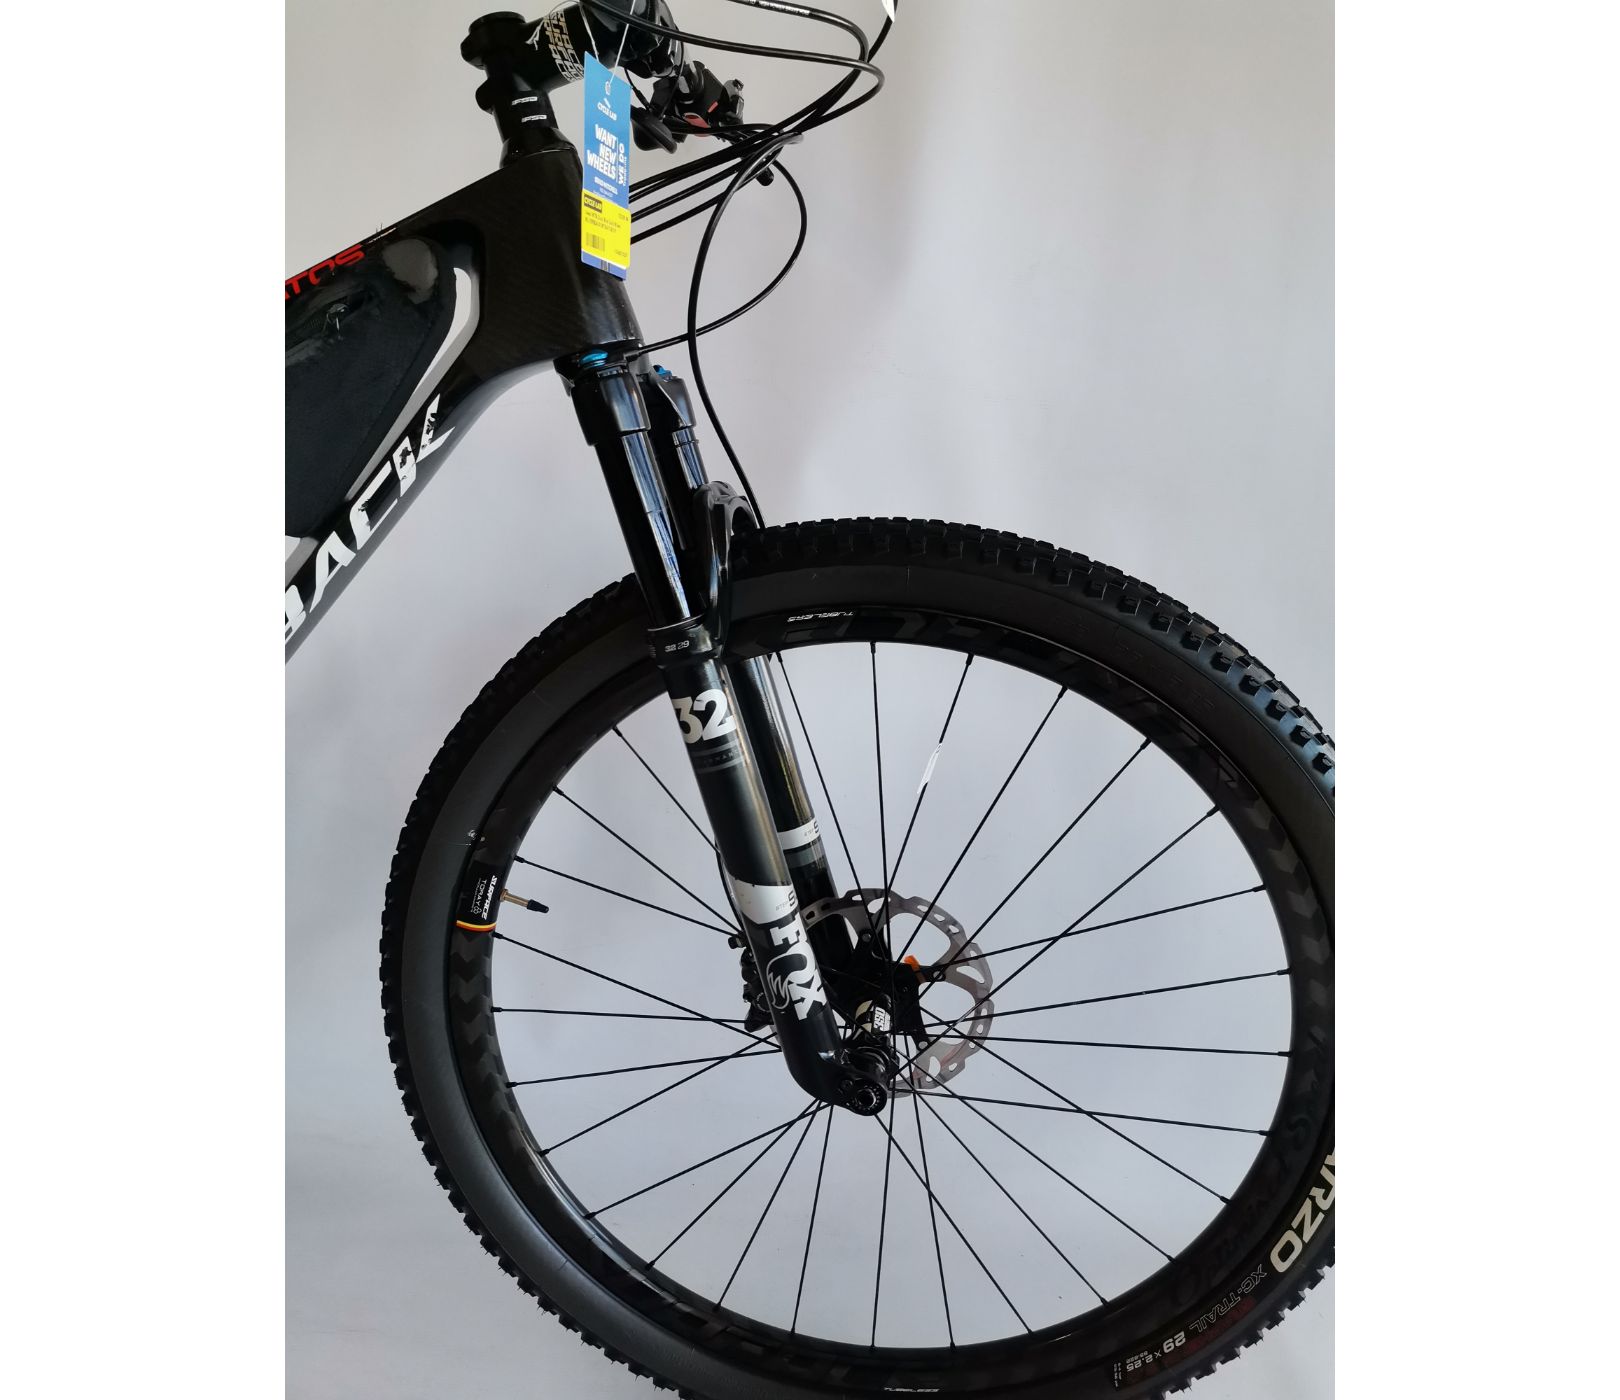 Pre-Owned Silverback Stratos Carbon Dual Suspension Mountain Bike - L